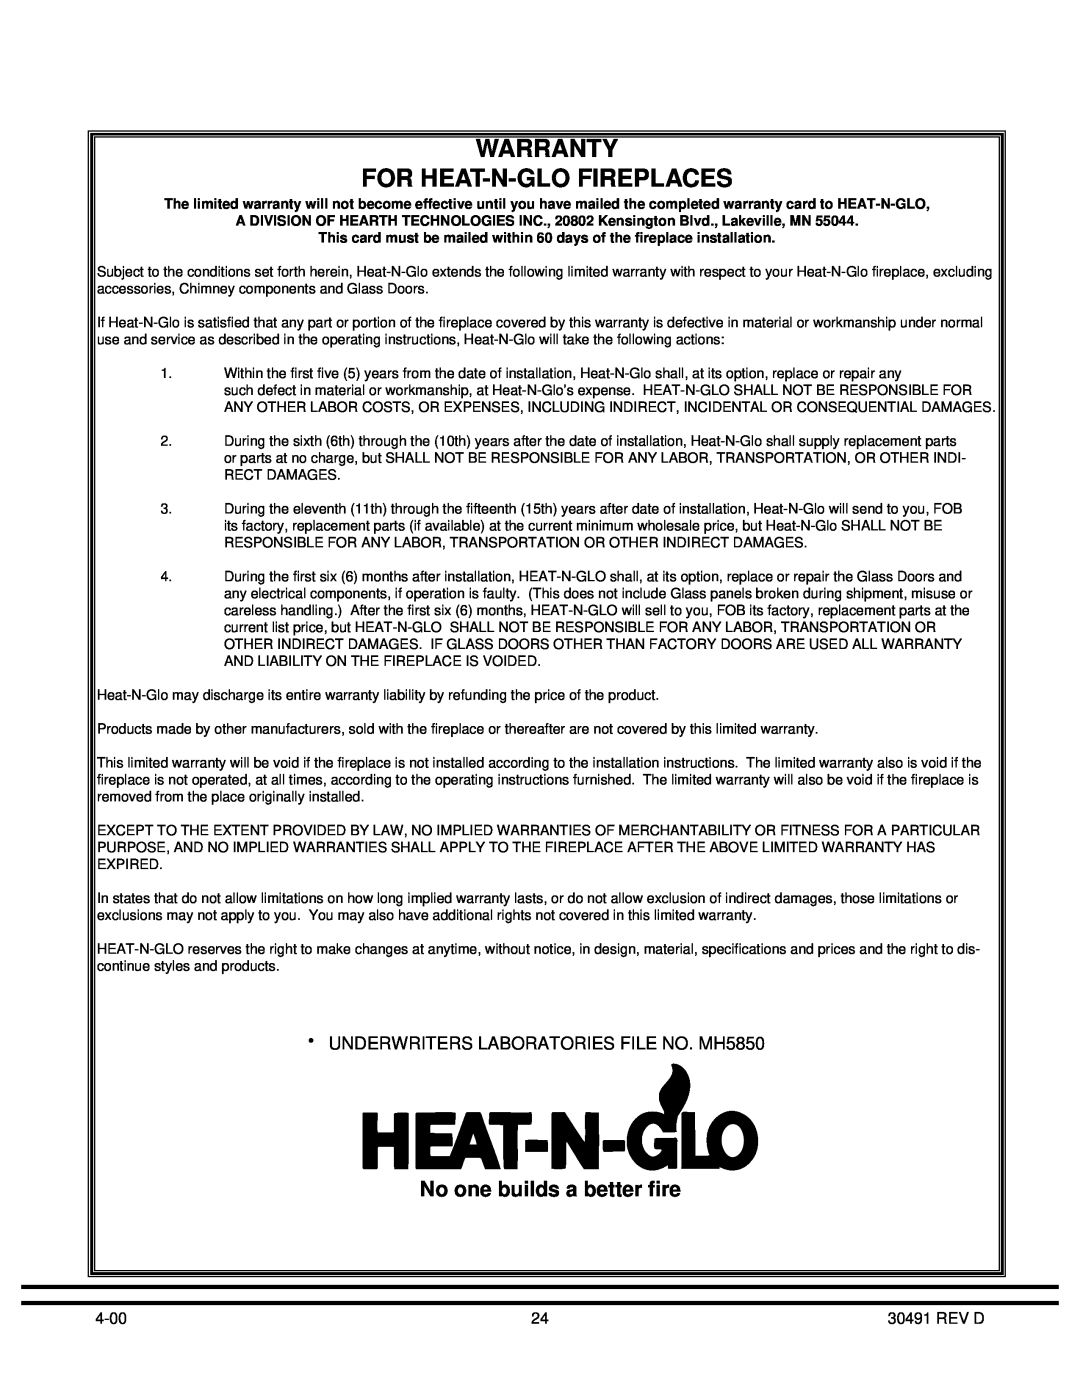 Heat & Glo LifeStyle BW36 operating instructions Warranty For Heat-N-Glofireplaces, No one builds a better fire 